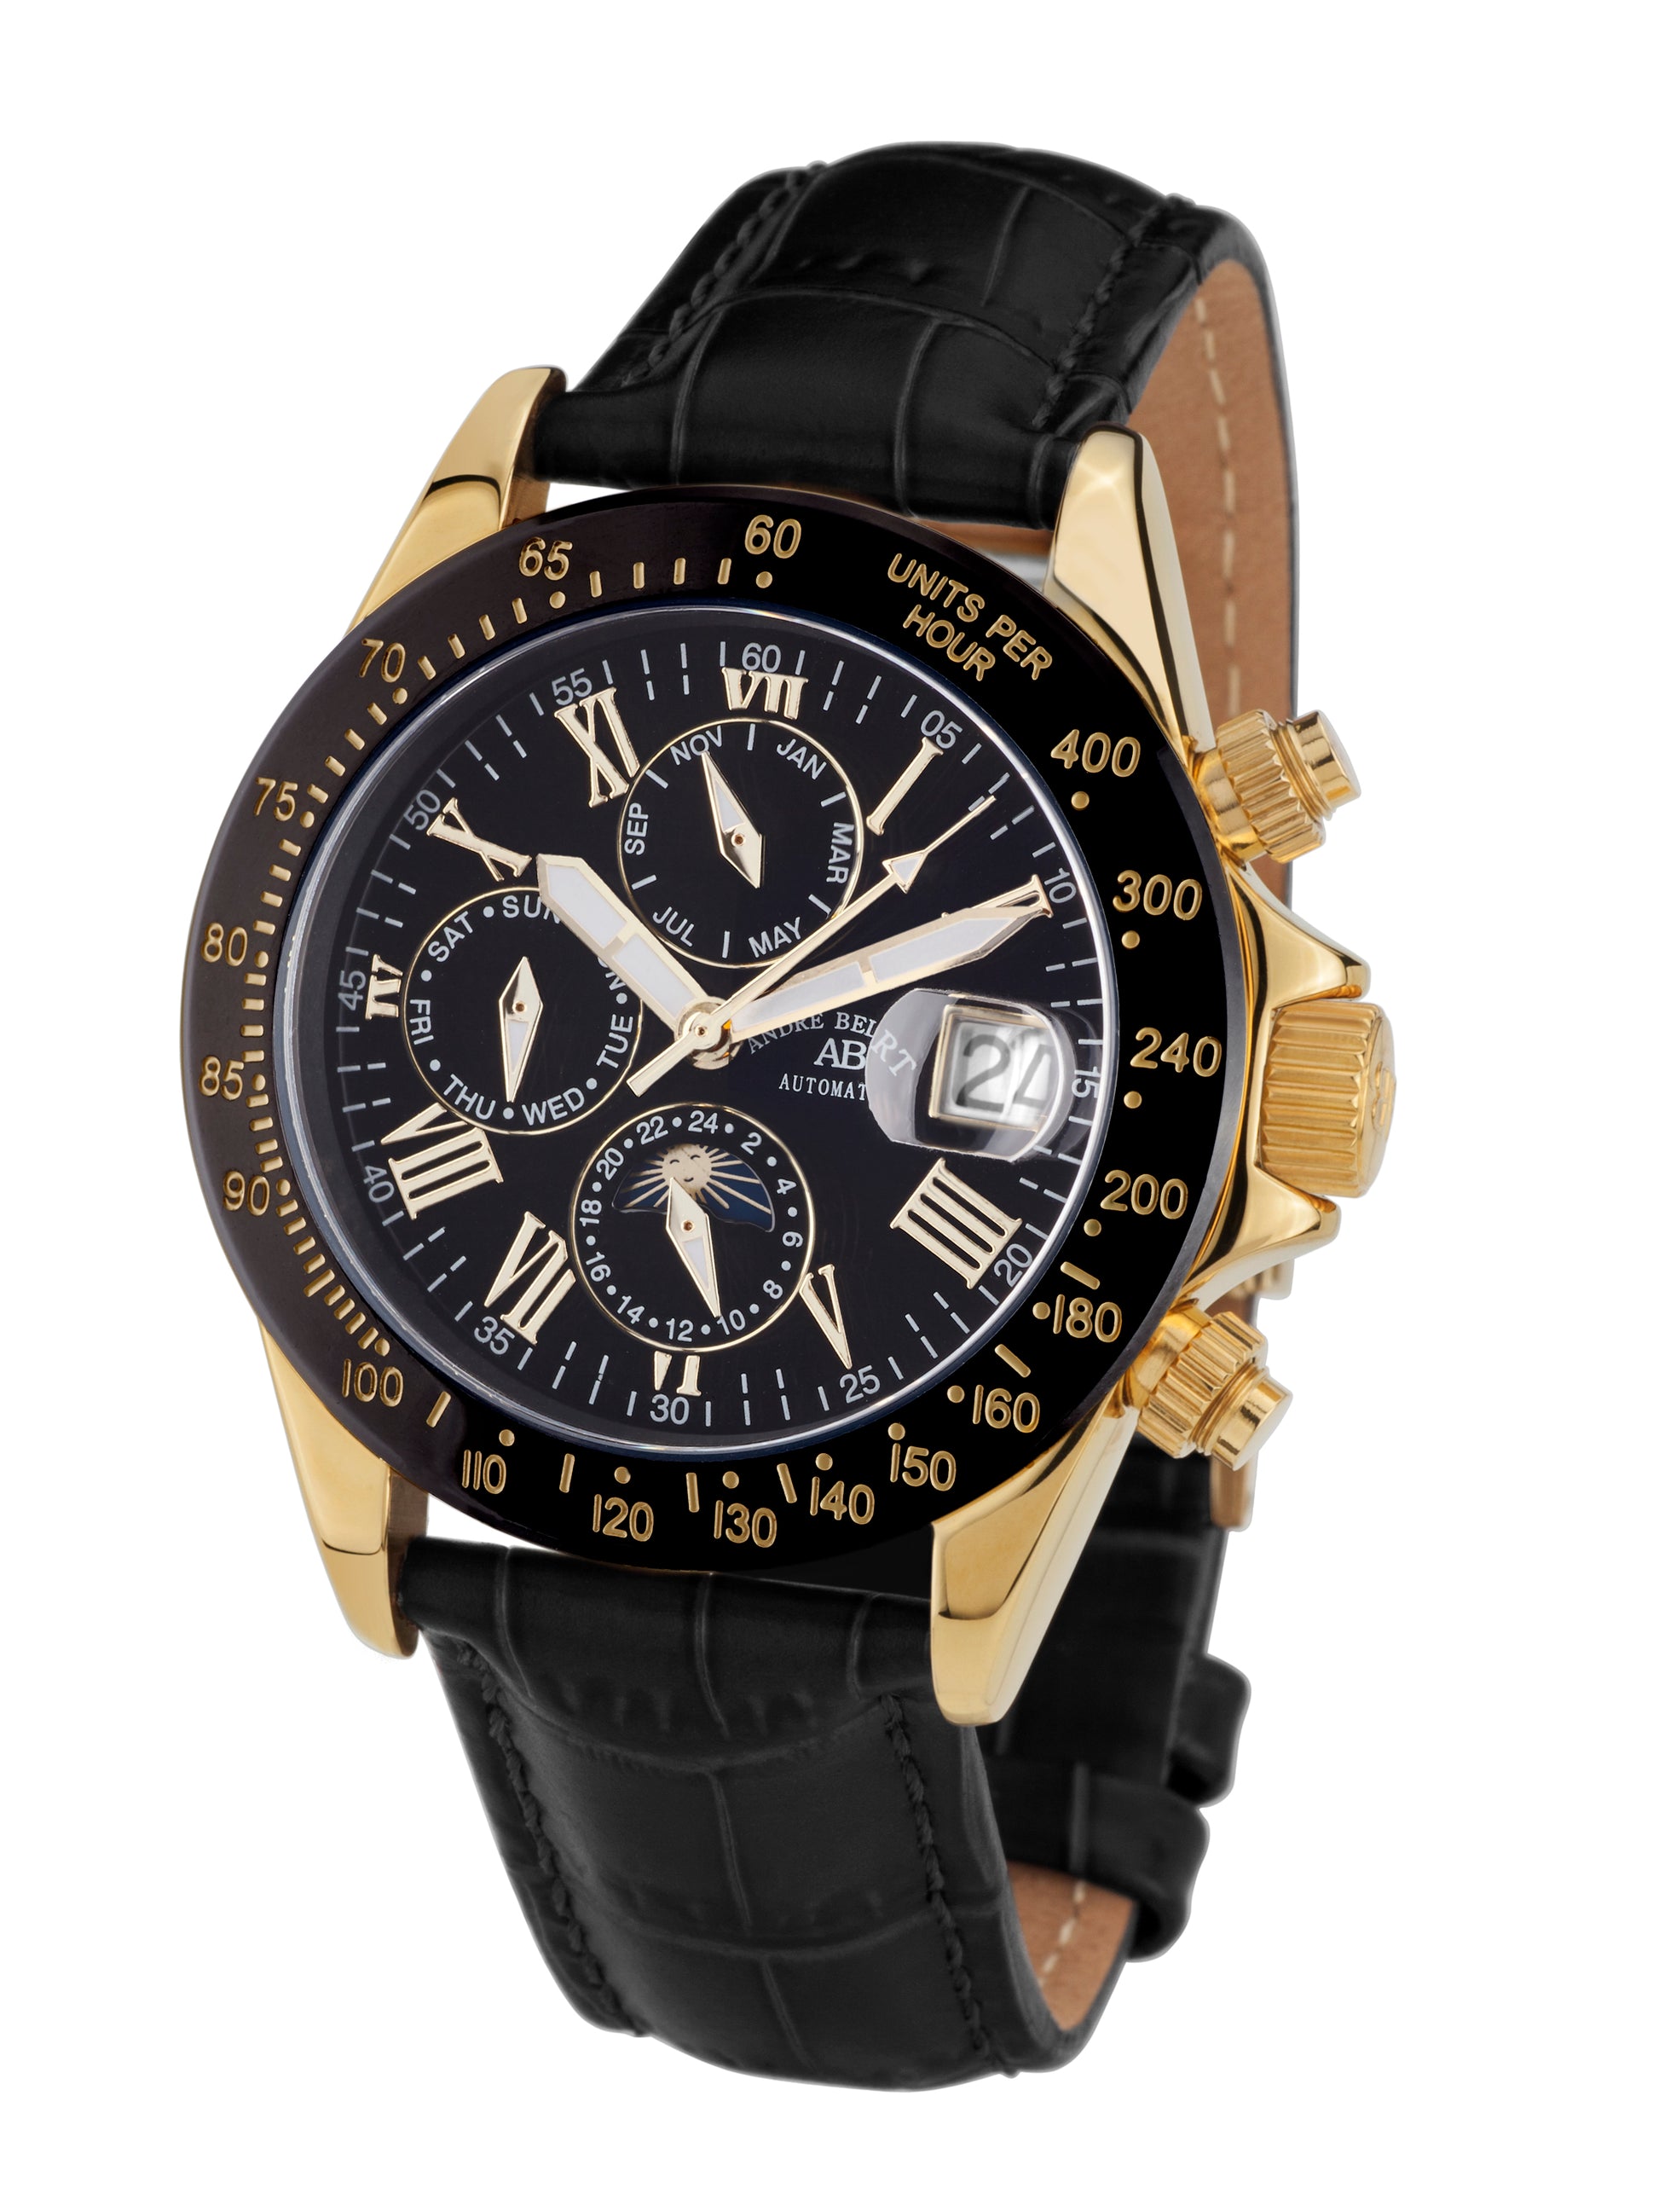 Automatic watches — Le Capitaine — André Belfort — gold onyx leather II